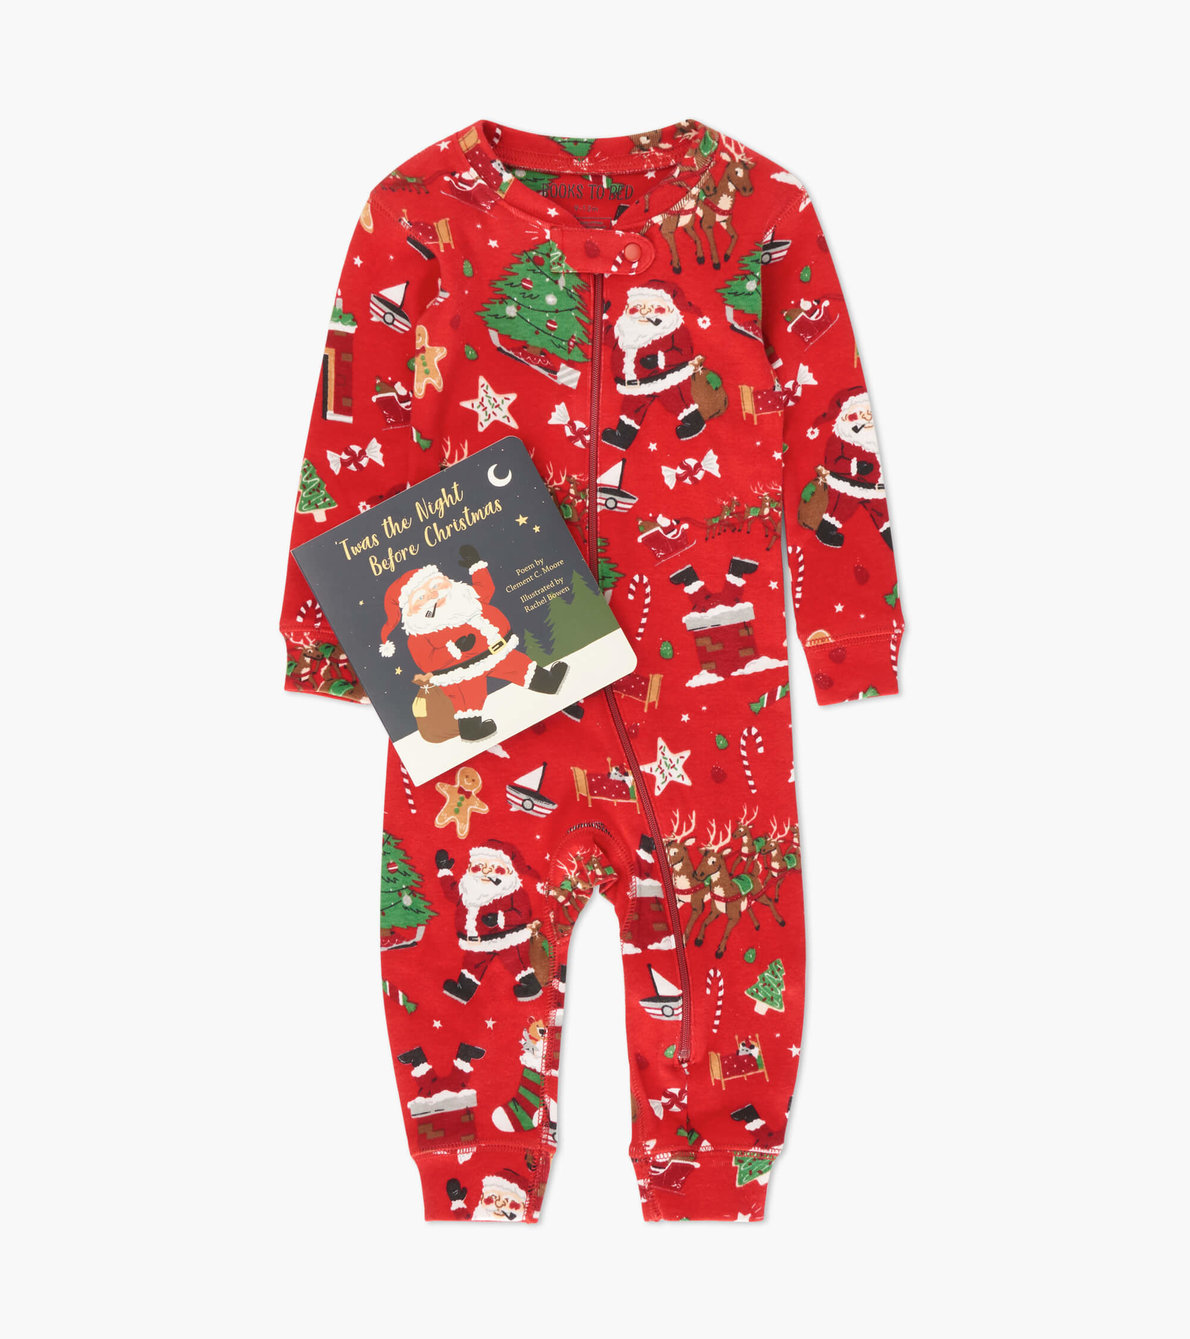 View larger image of Twas The Night Before Christmas Book and Infant Coverall